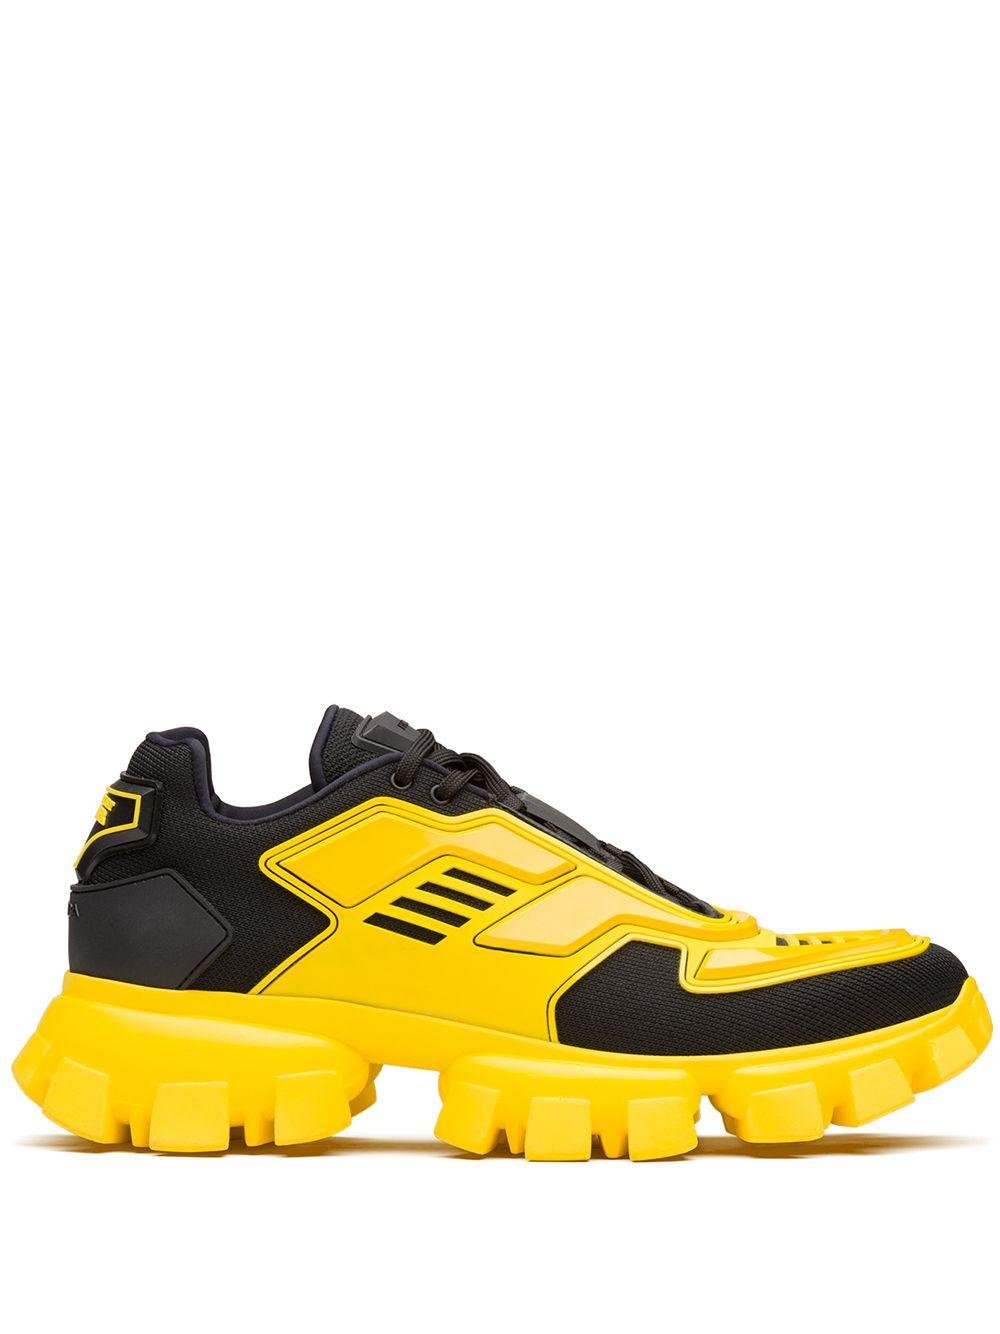 Prada Rubber Cloudbust Thunder Sneakers in Yellow for Men | Lyst